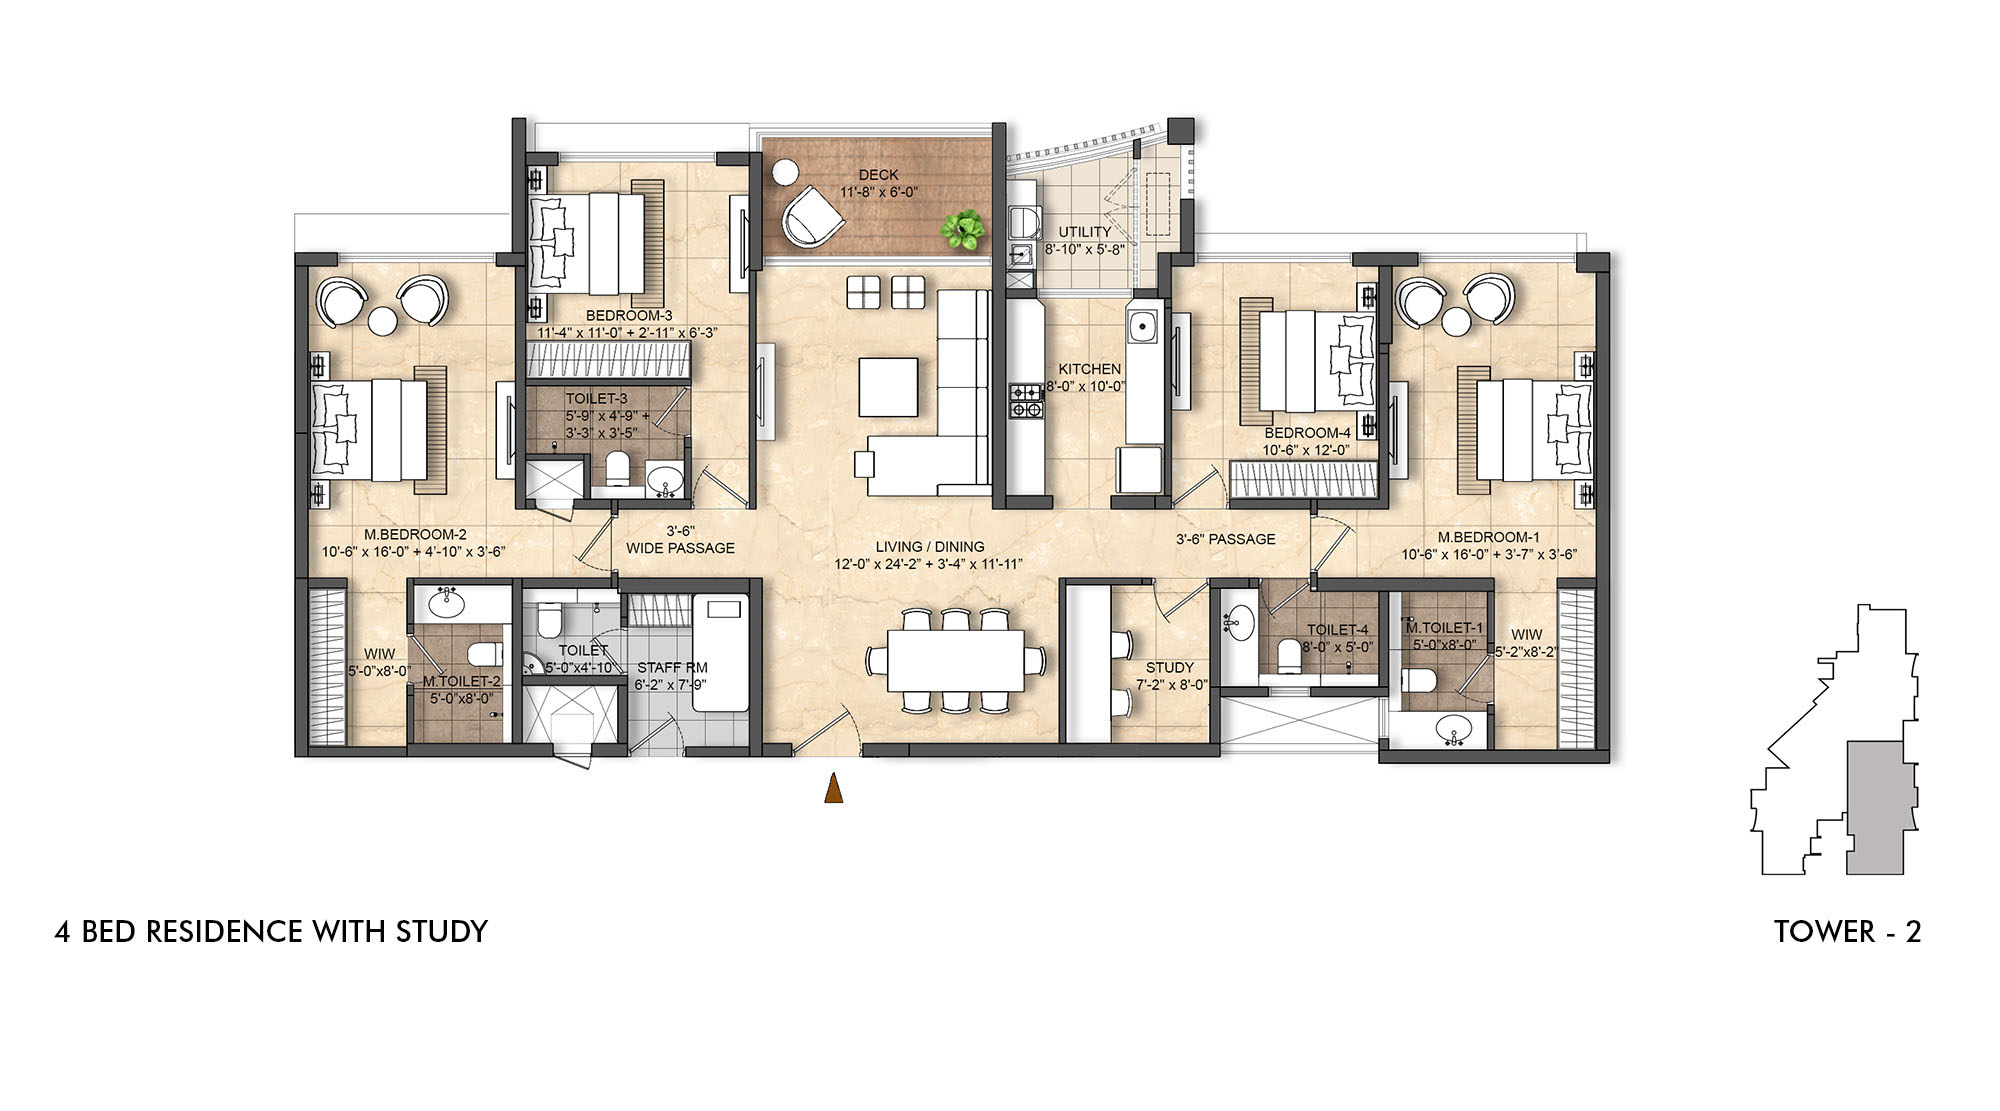 4 Bedroom With Study